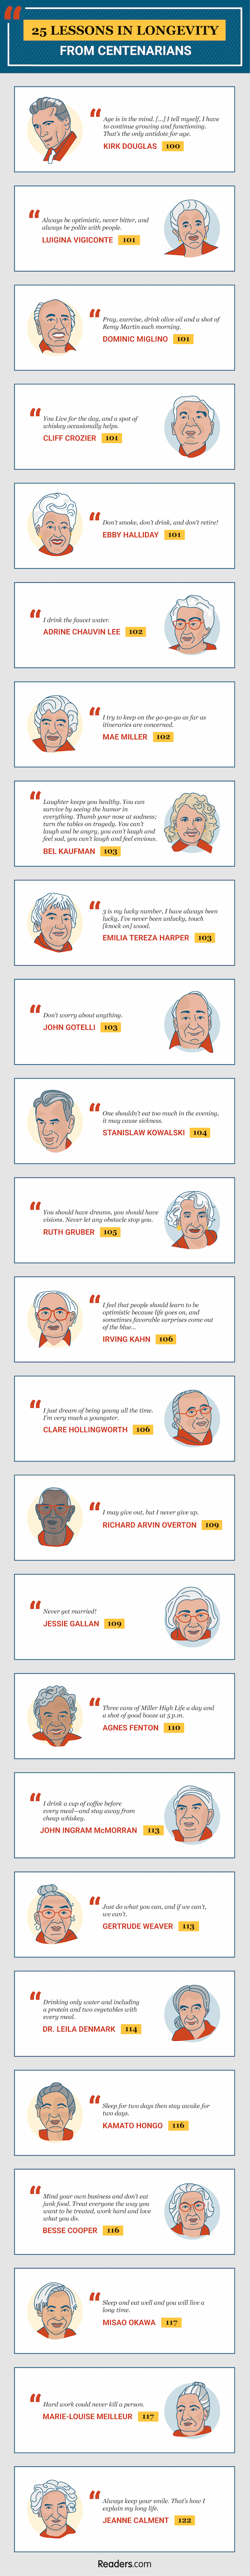 25 Lessons in Longevity from Centenarians - #infographic